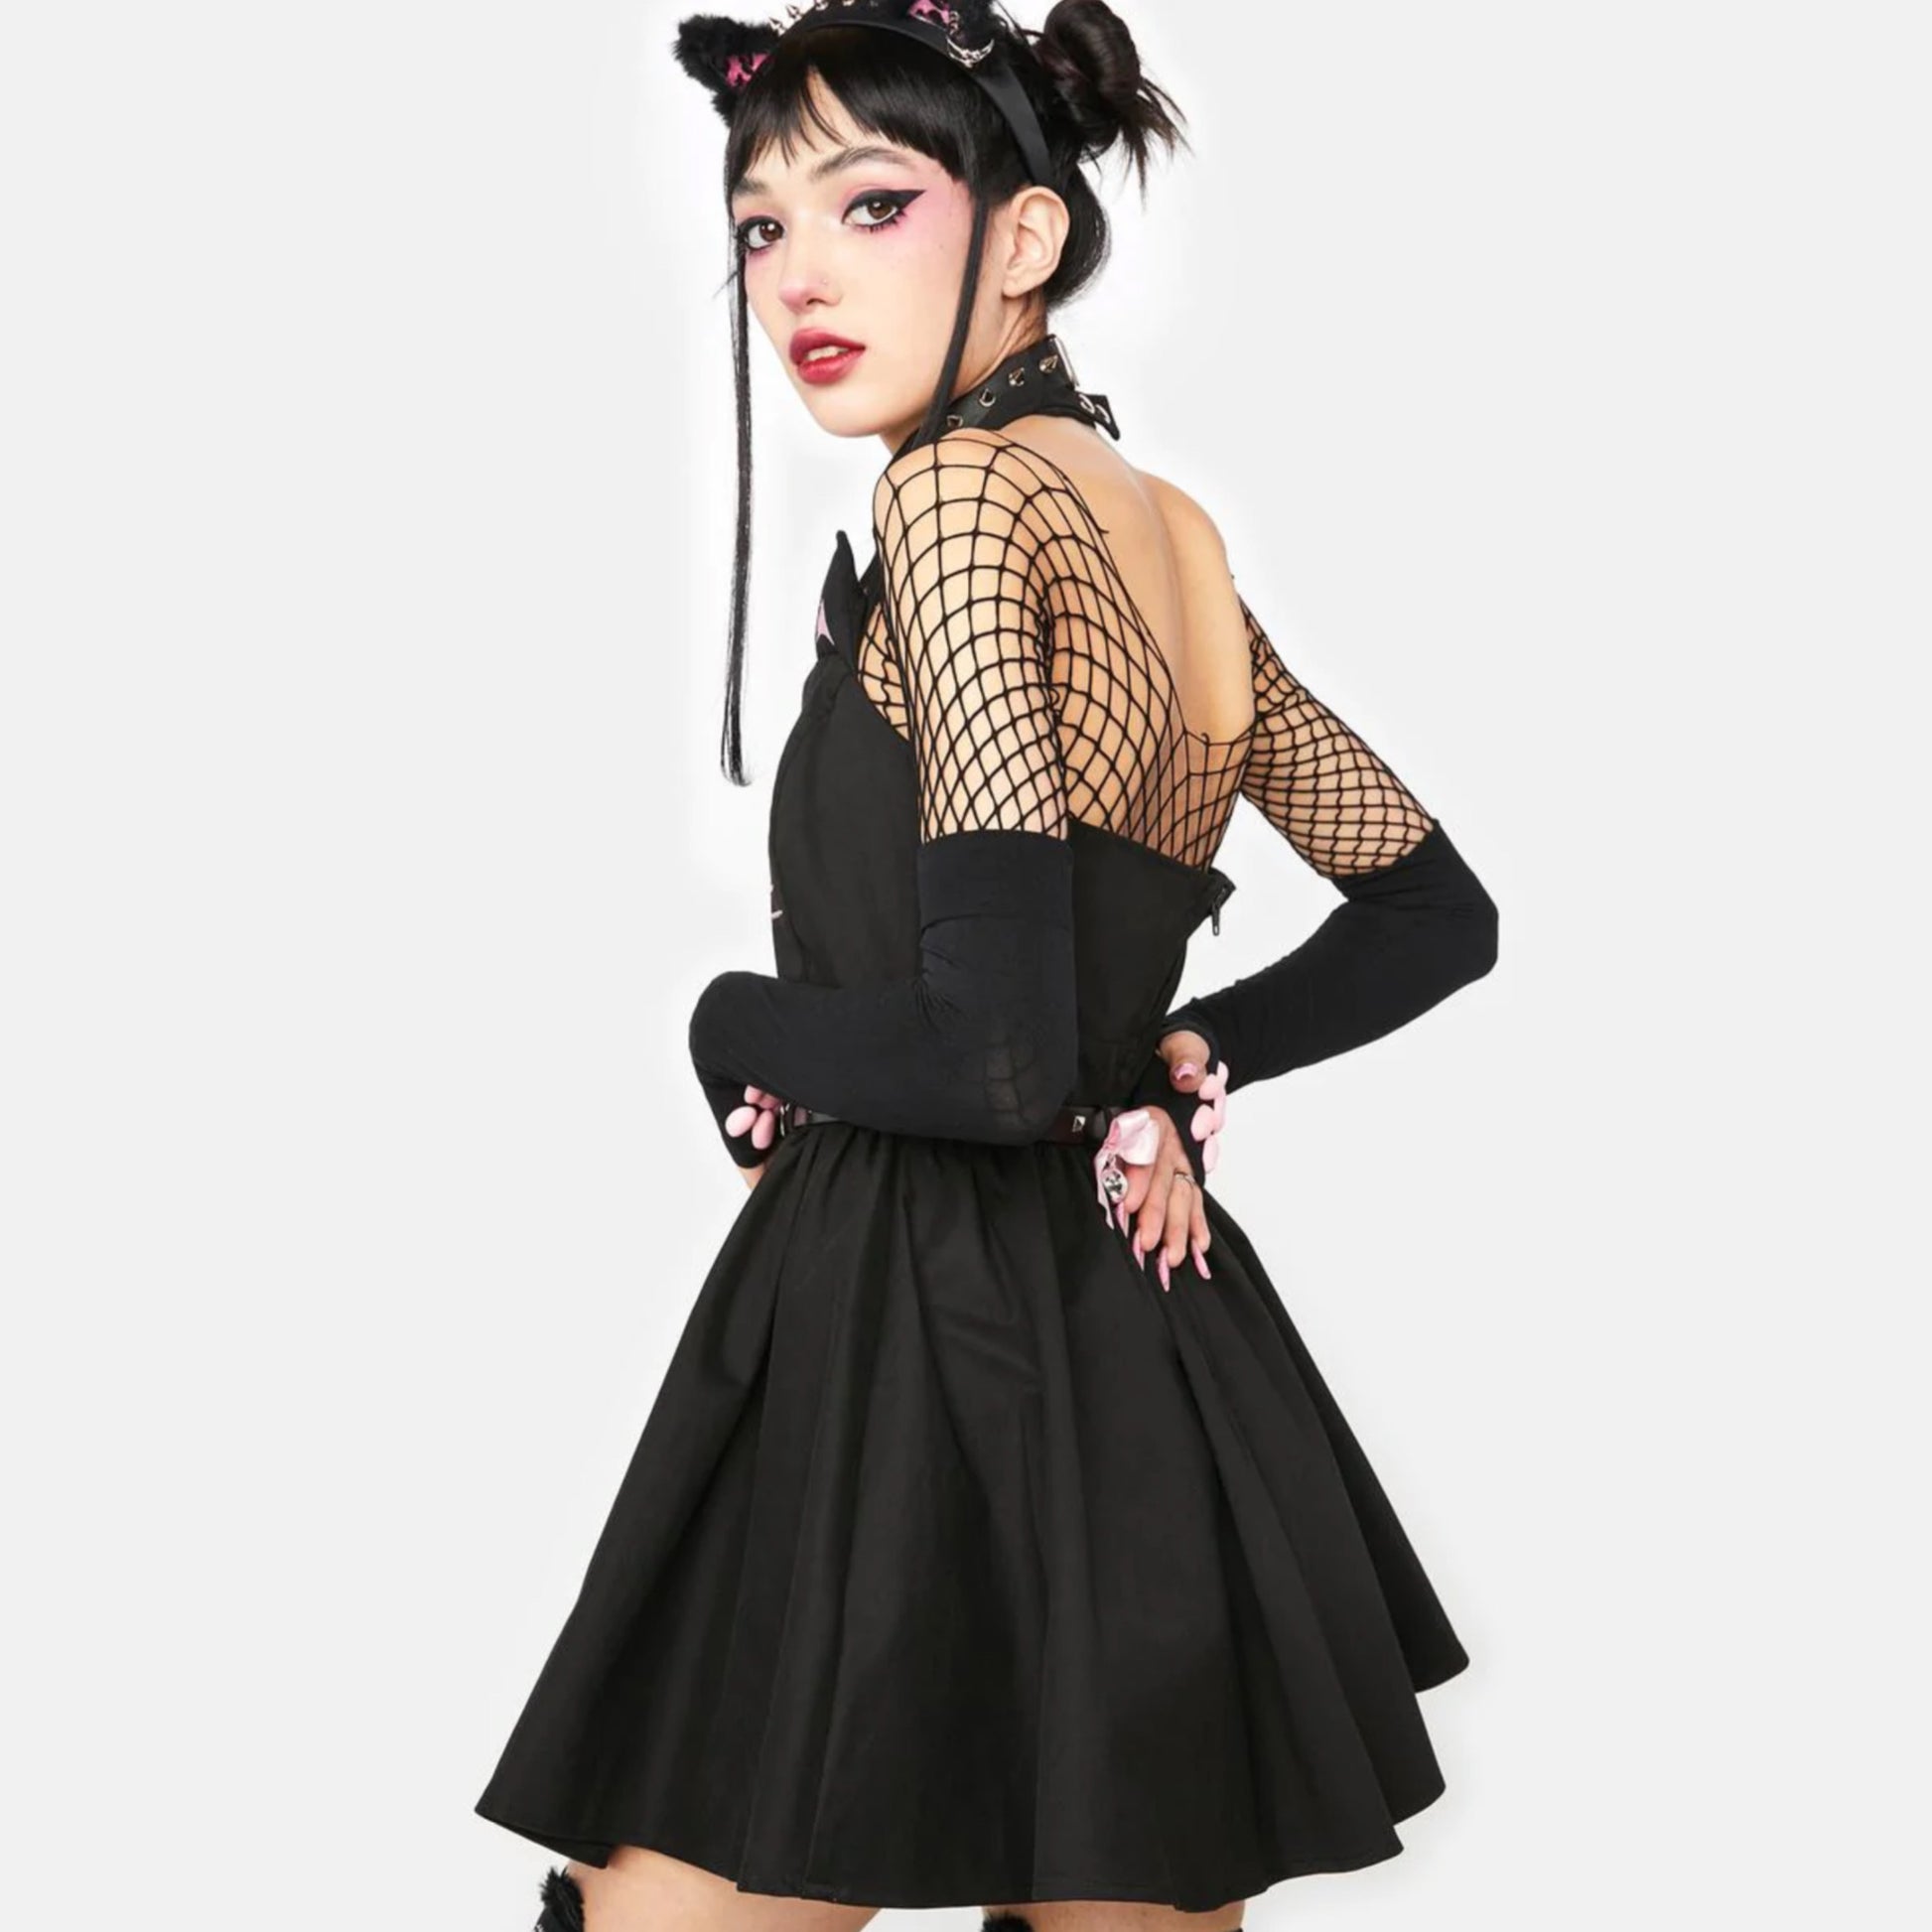 Black Kitty Mini Dress | Puffy Cat Ear Details Embroidered Cat Graphic & Studded Belt - The Grave Girls - Dresses